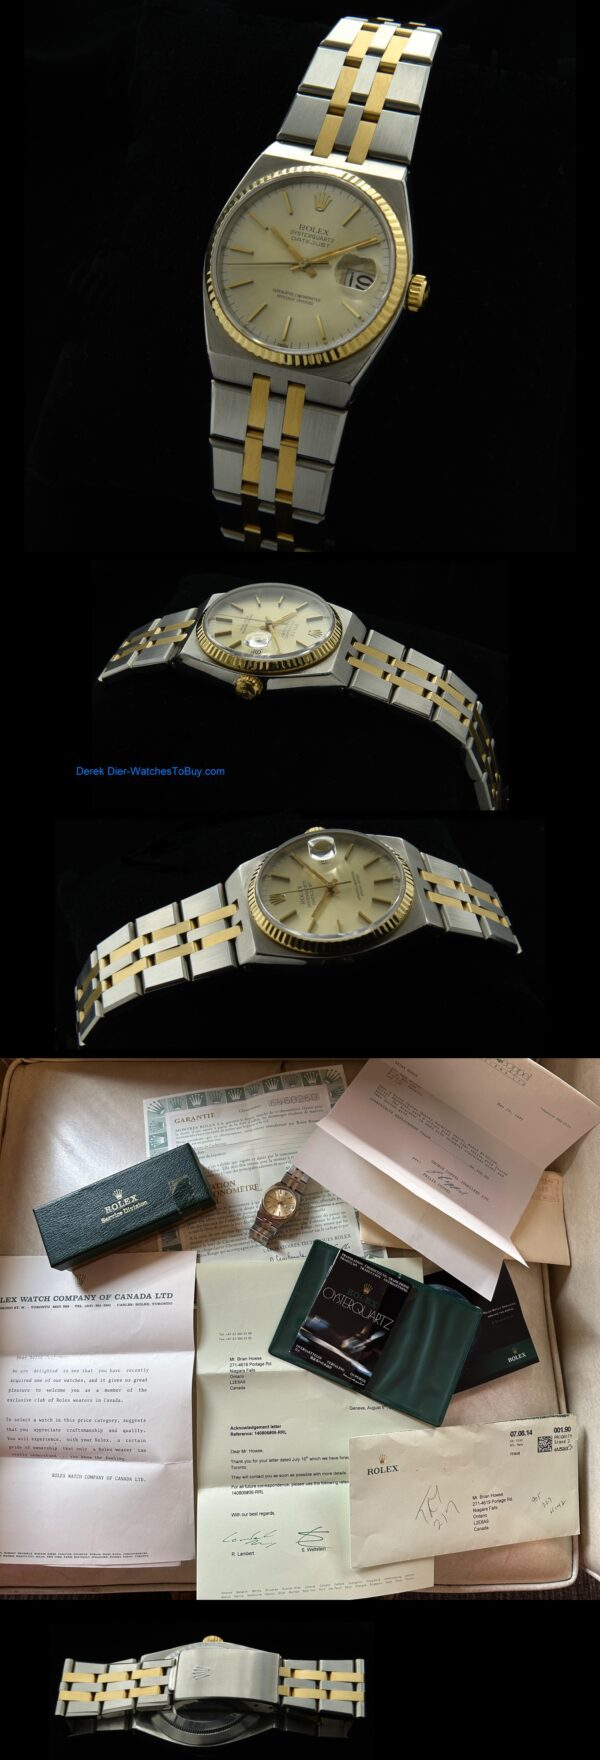 1980 Rolex Datejust Oysterquartz gold and steel watch with original papers, service box, case, tight bracelet, and accurate quartz movement.